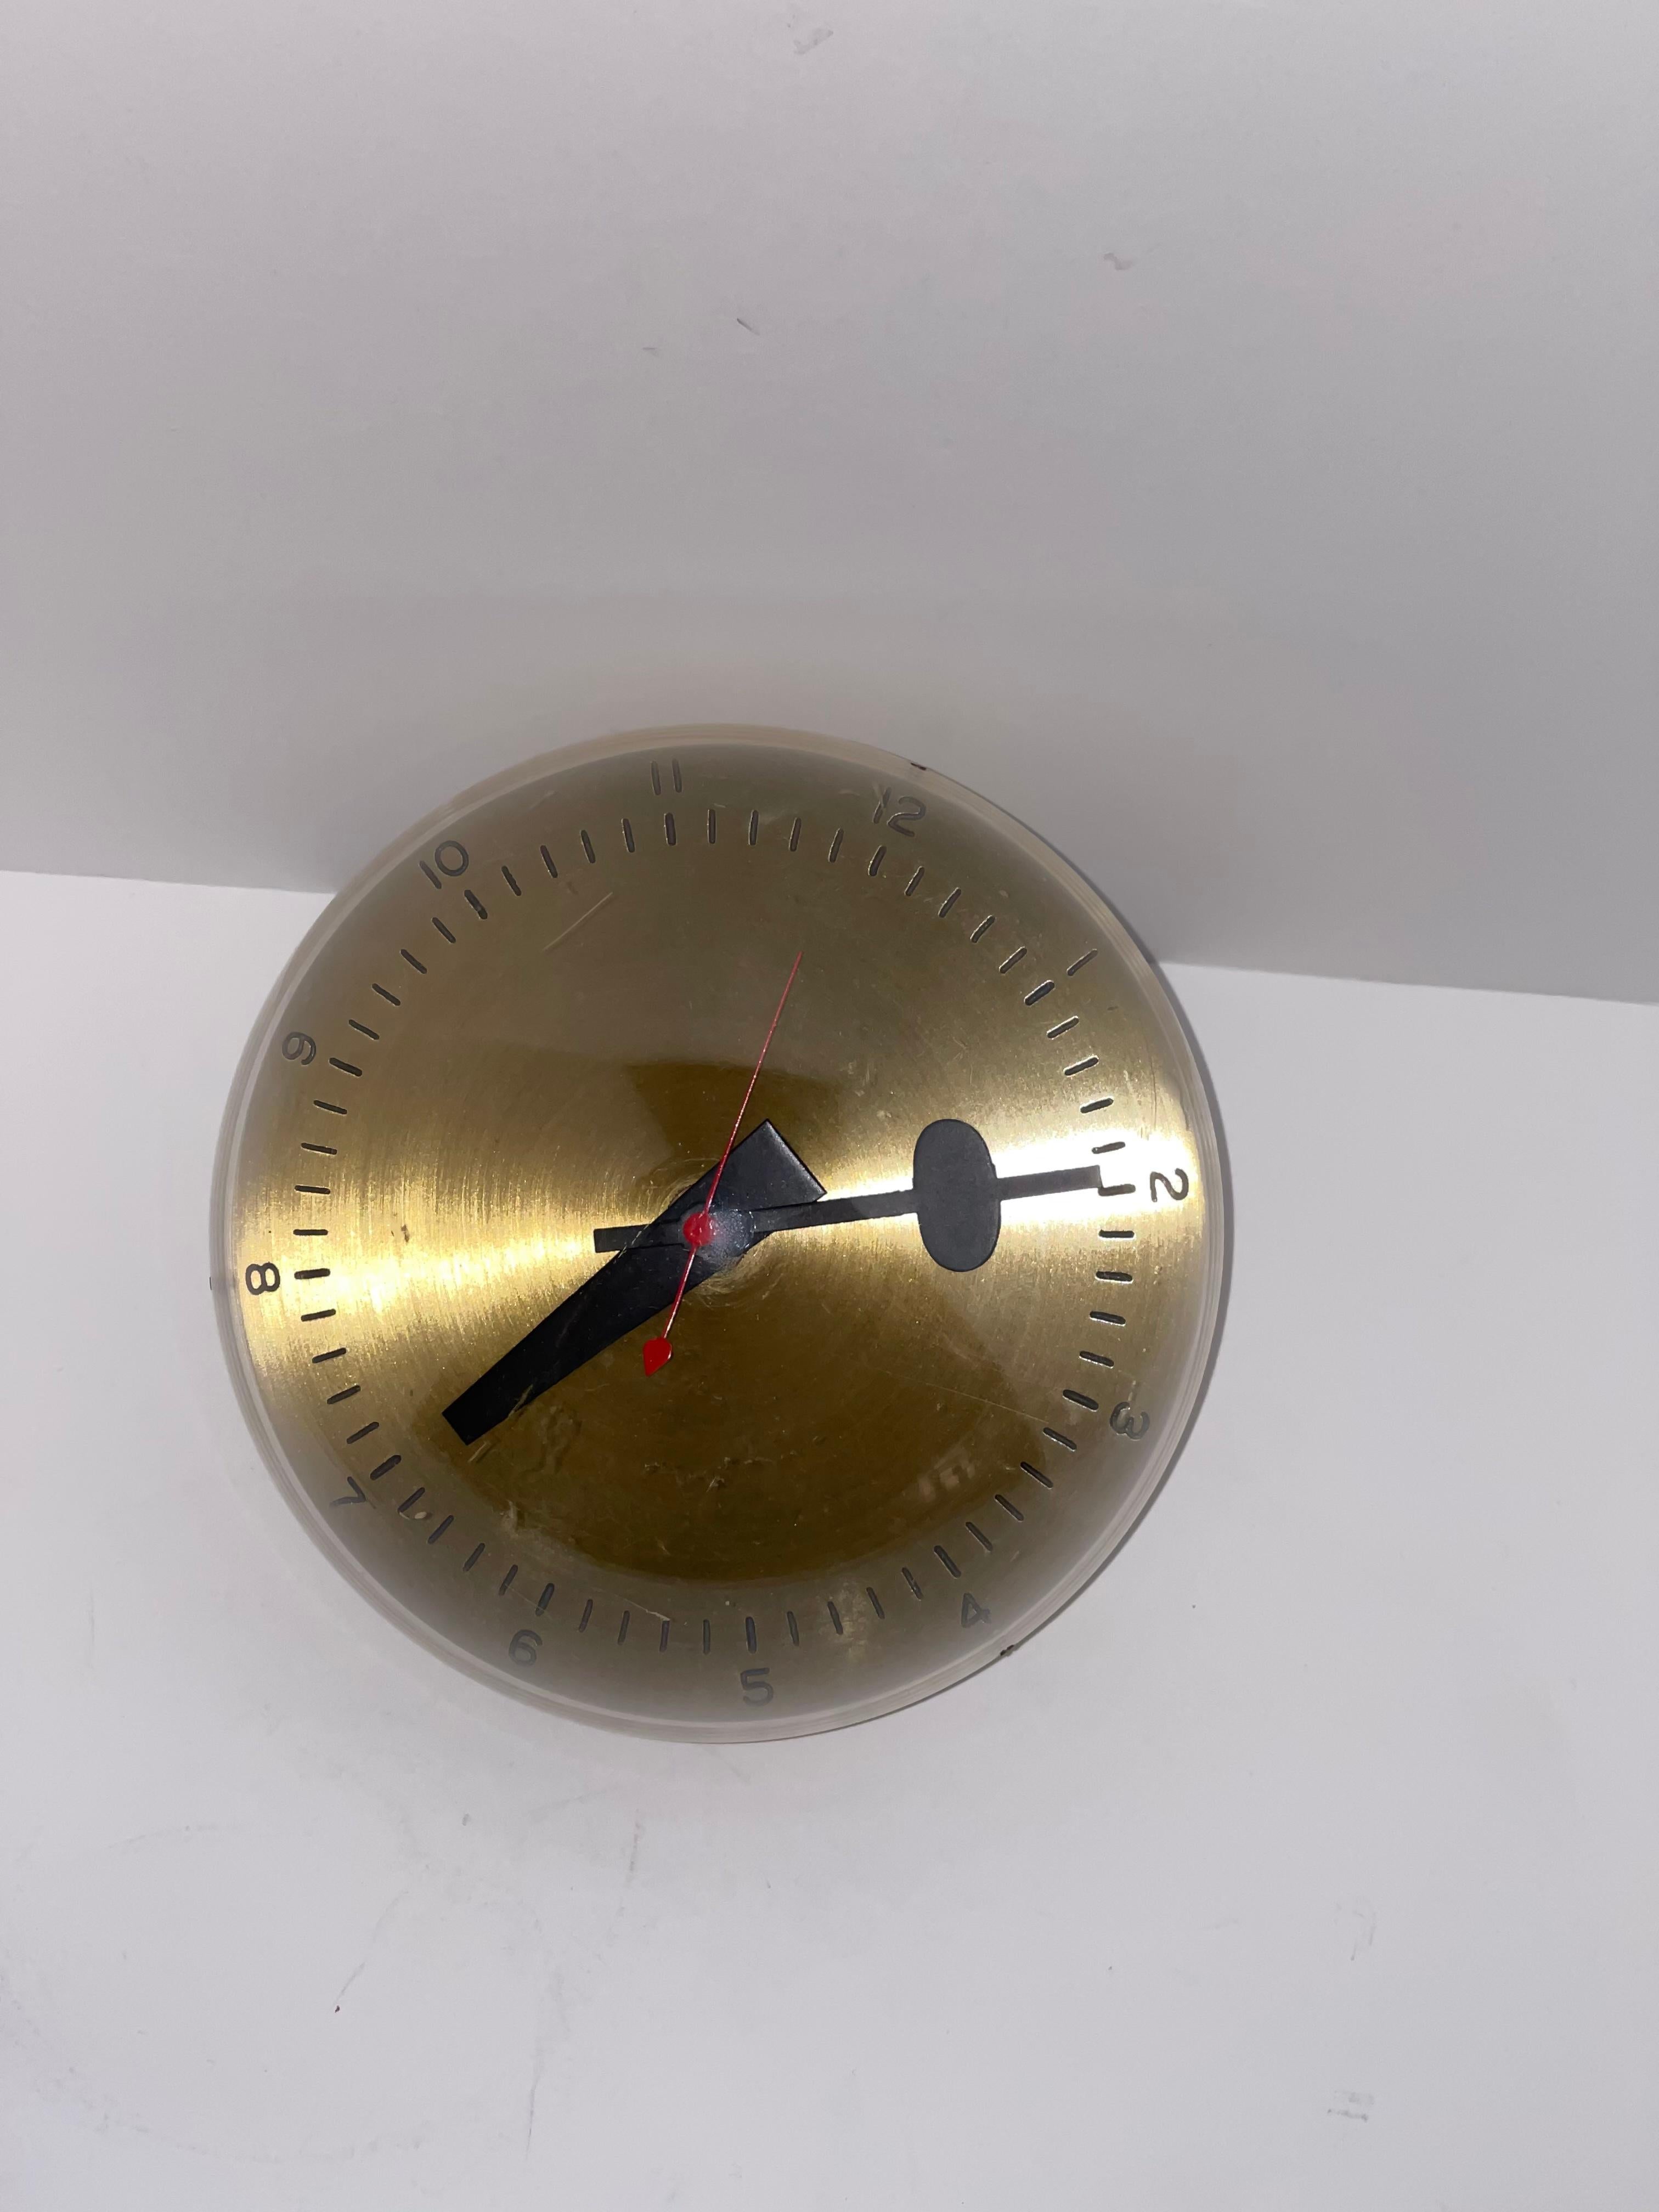 An early Howard Miller clock by George Nelson. It is model 4759 and is running order. It came to us with a plug attached to the back for a direct plug into the wall. We added a cord and plug and it is new wiring. Great overall vintage condition. The